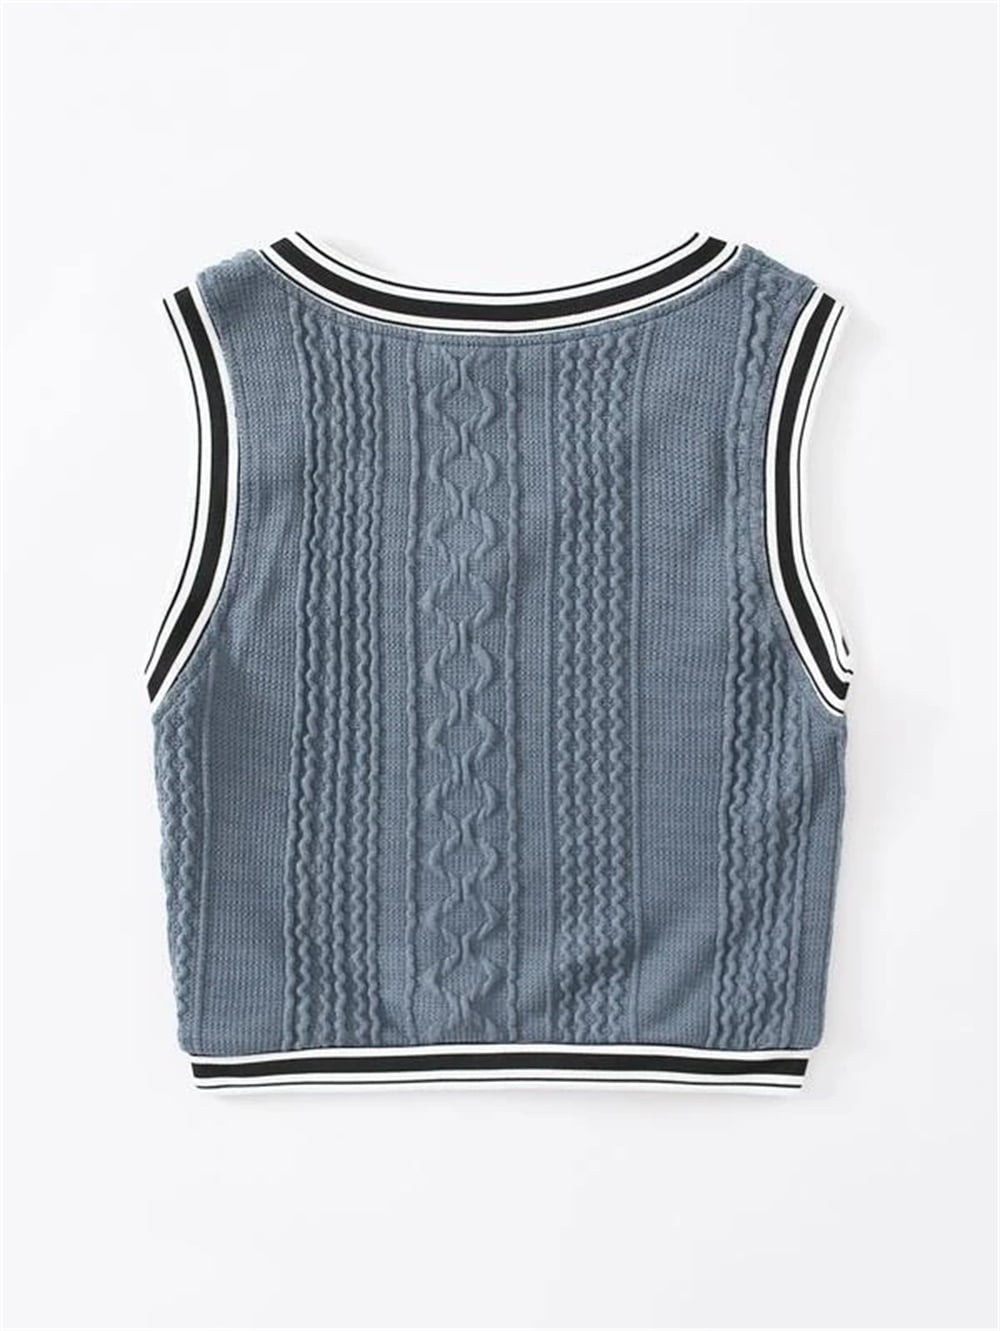 WANHONGYUE Cute Cartoon Sweater Vest Women V Neck Cable Knit Sweaters Girls  Plaid School Uniform Sleeveless Pullover Tank Top Blue S at  Women's  Clothing store